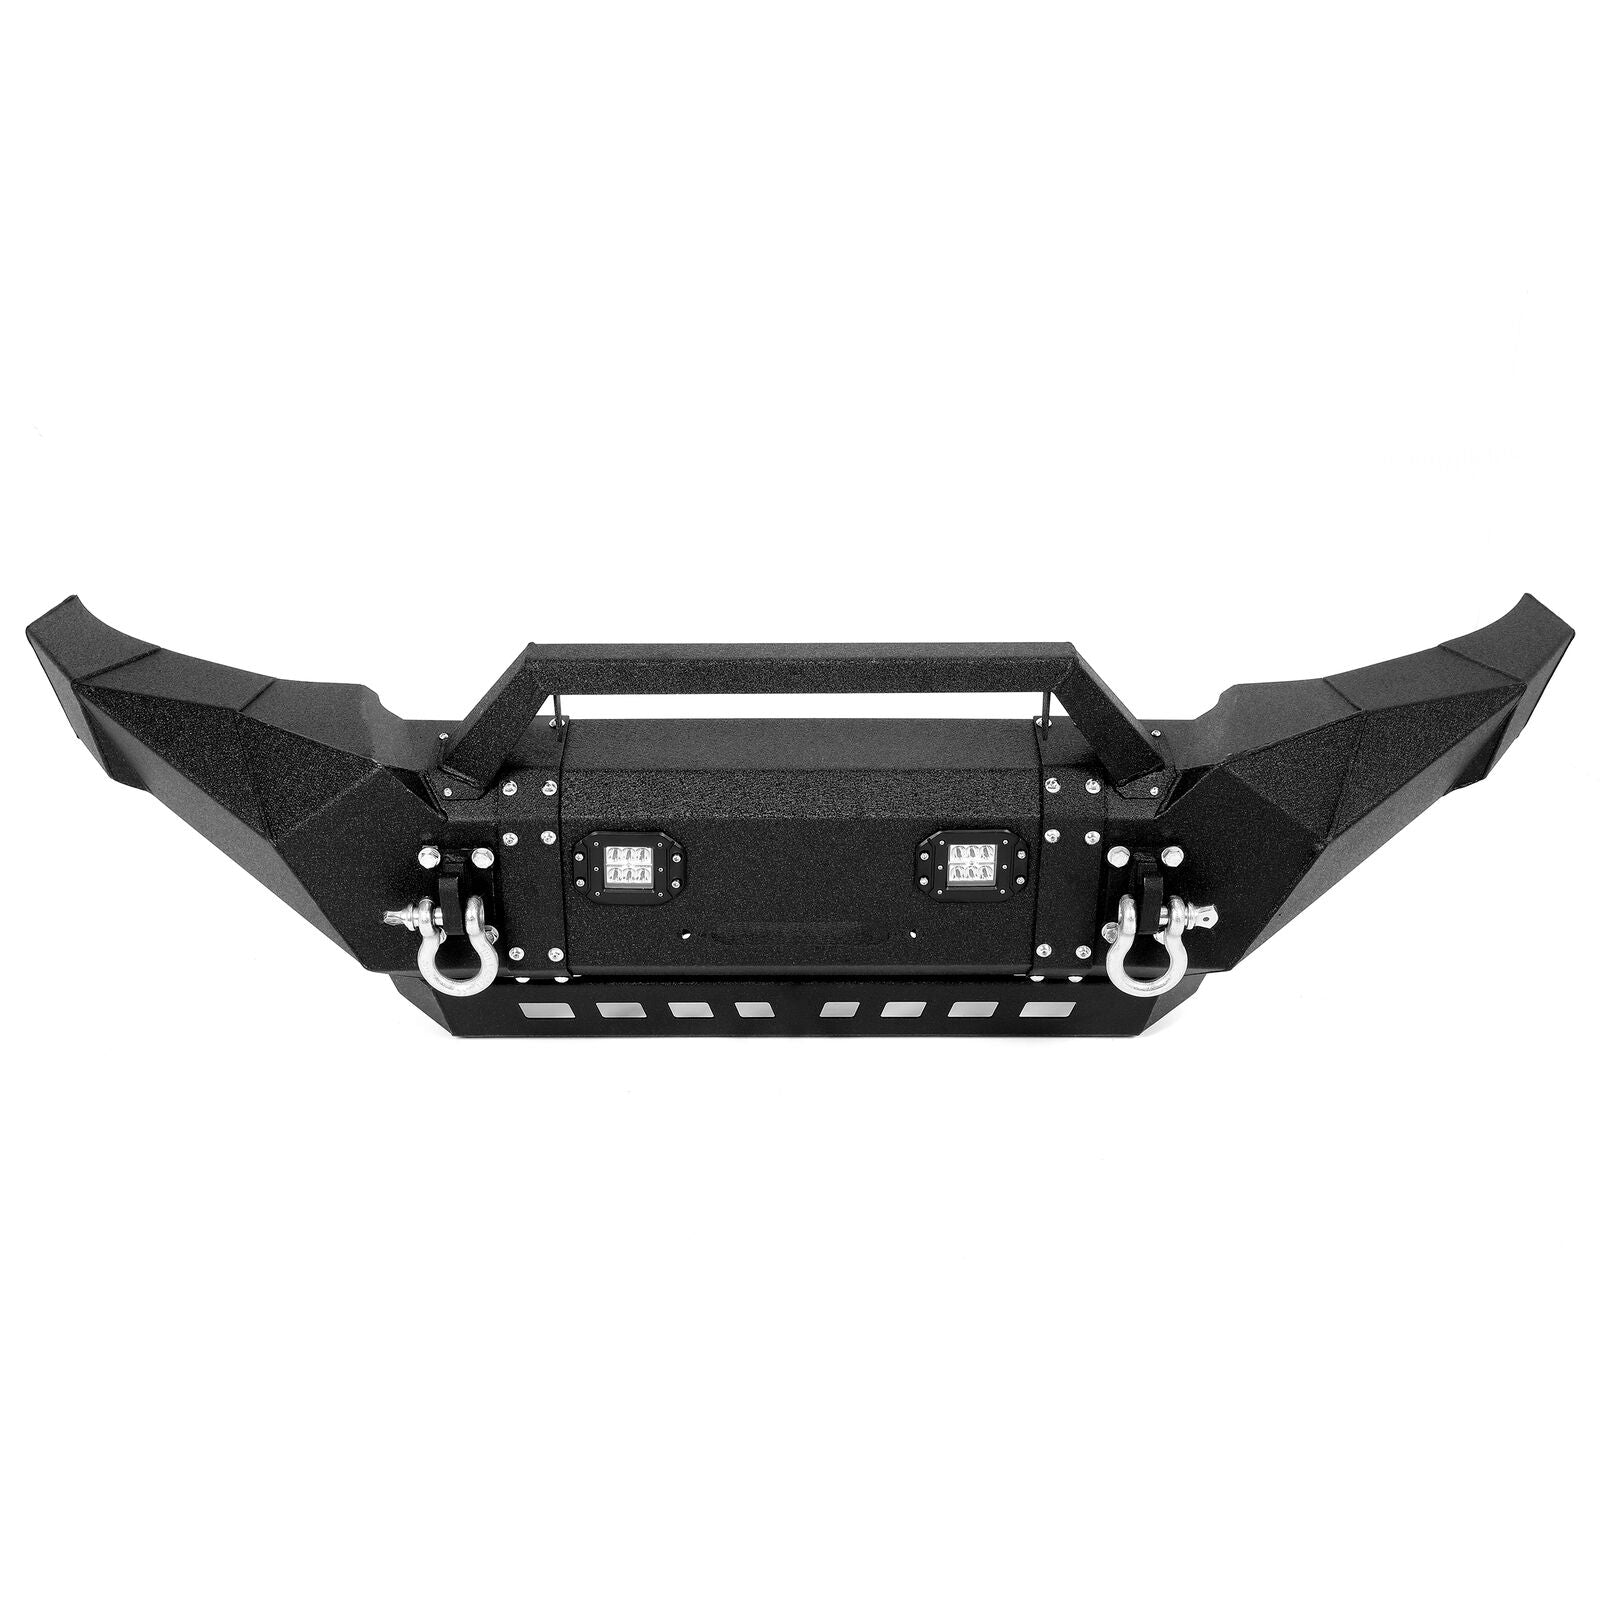 MR.GOP-Front Bumper Pickup For Tacoma 2005-2015 w/ LED Lights + Winch Plate + D-Rings